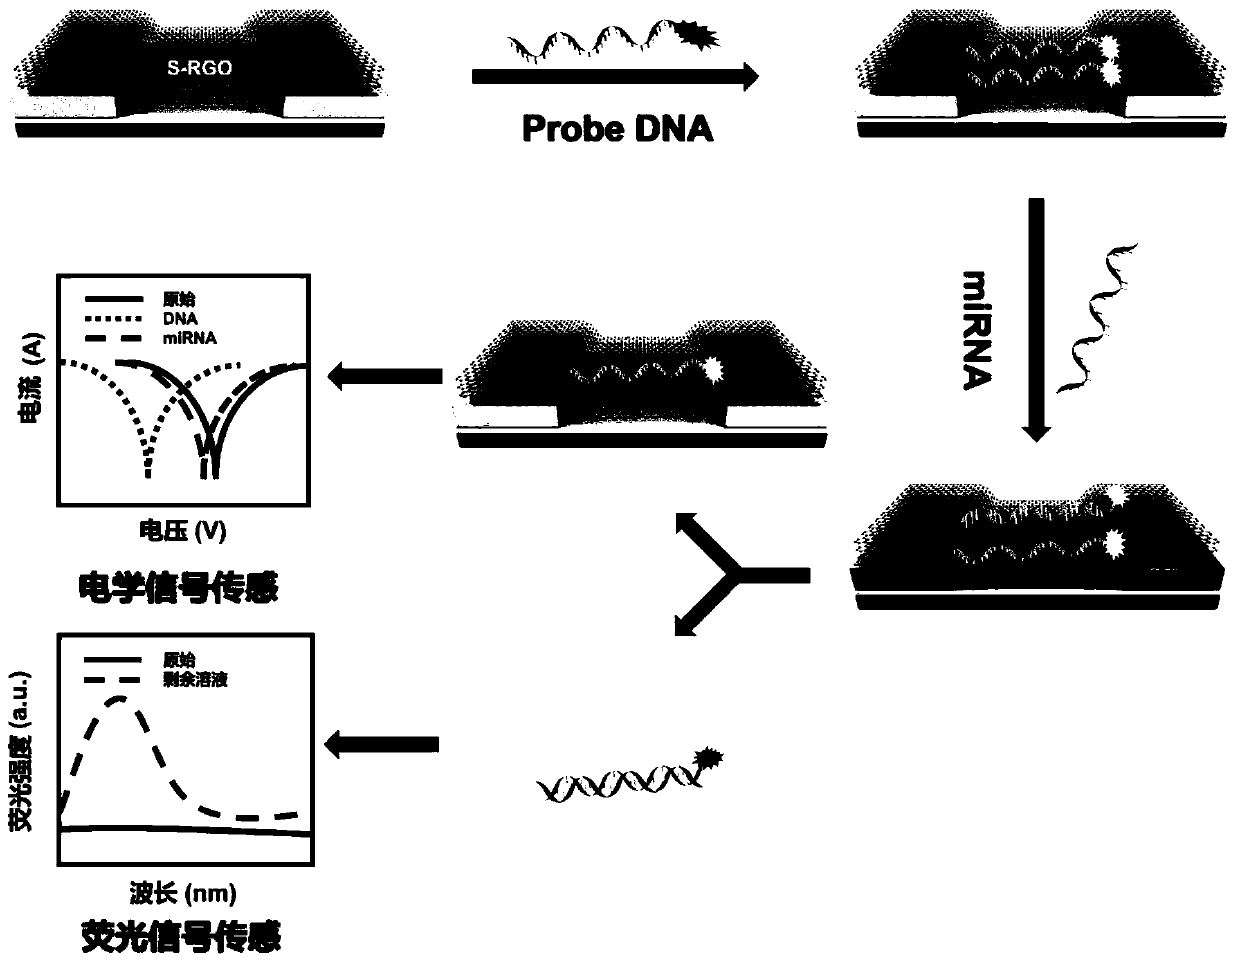 Self-calibration double-signal biosensor and application thereof in miRNA detection